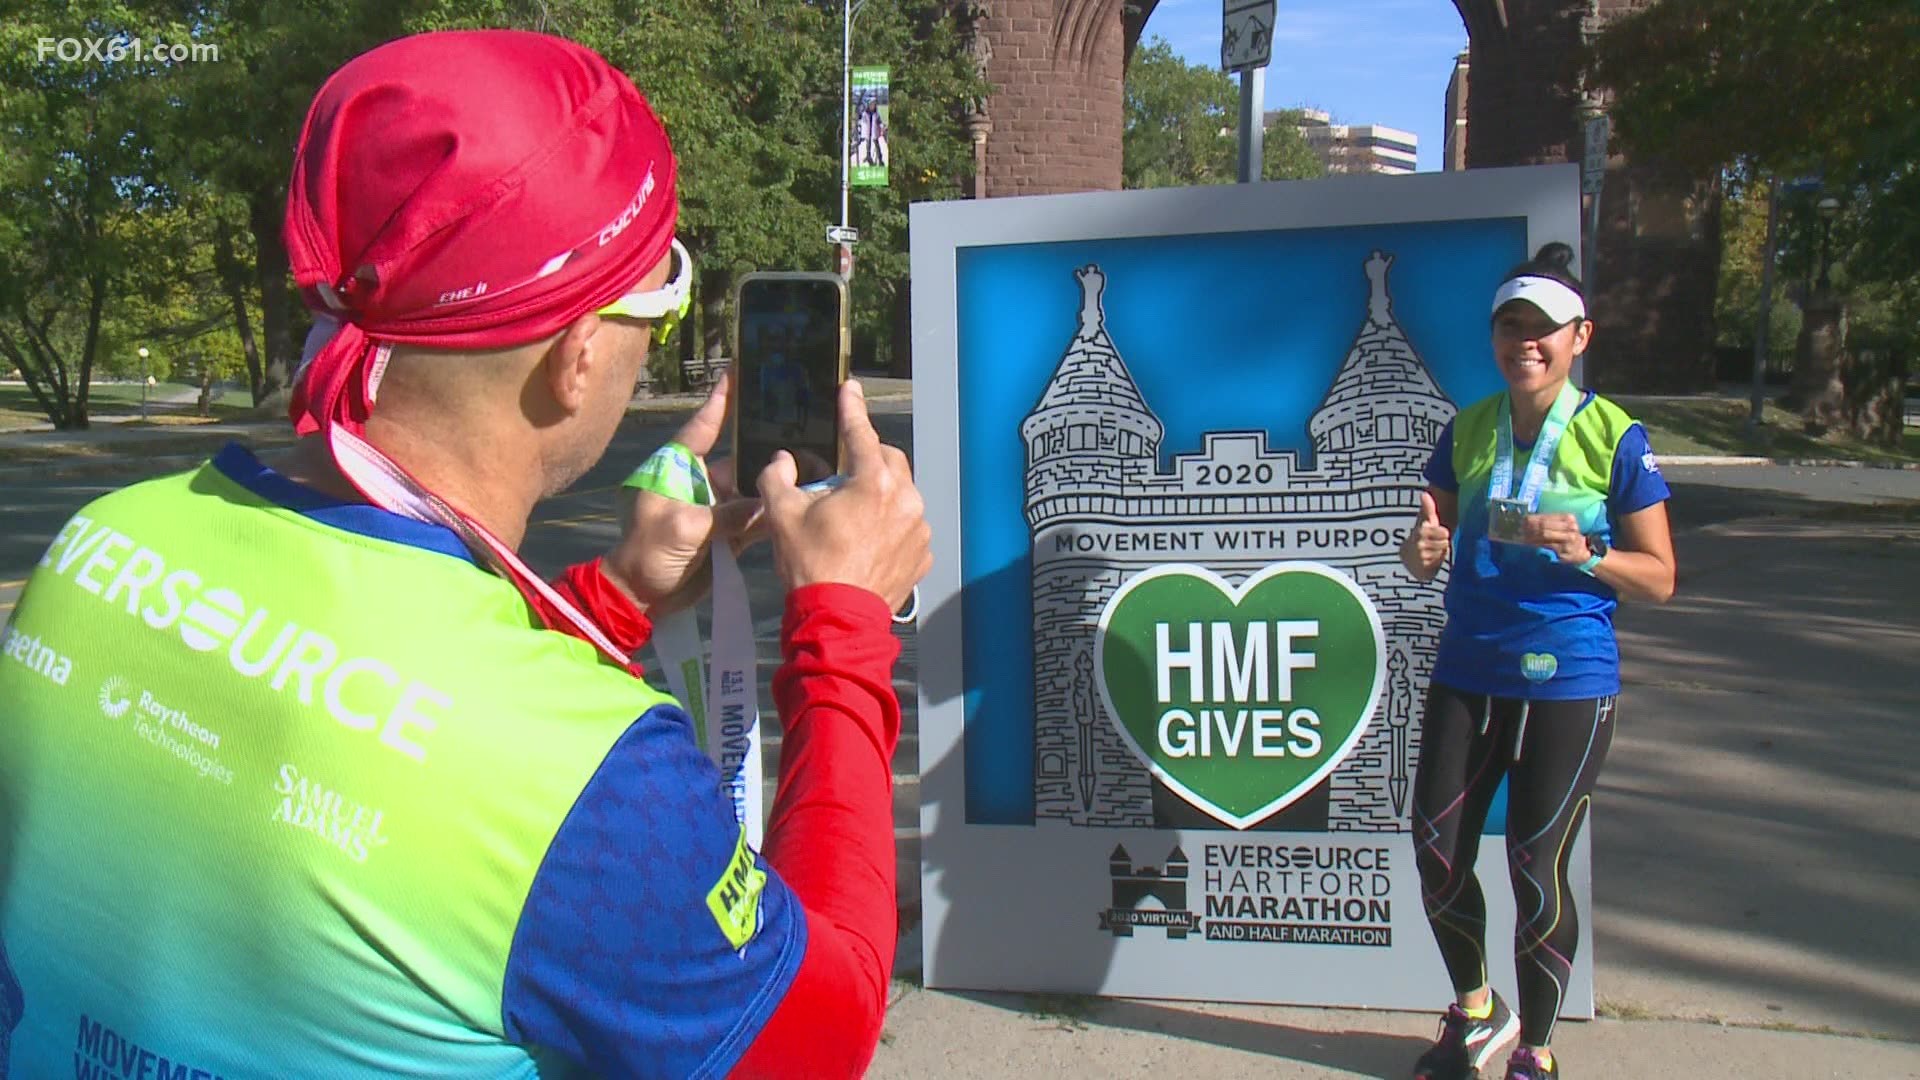 At popular running spots around CT, people participated in the "mobile medal" experience, taking pictures at their own finish lines while supporters cheered them on.